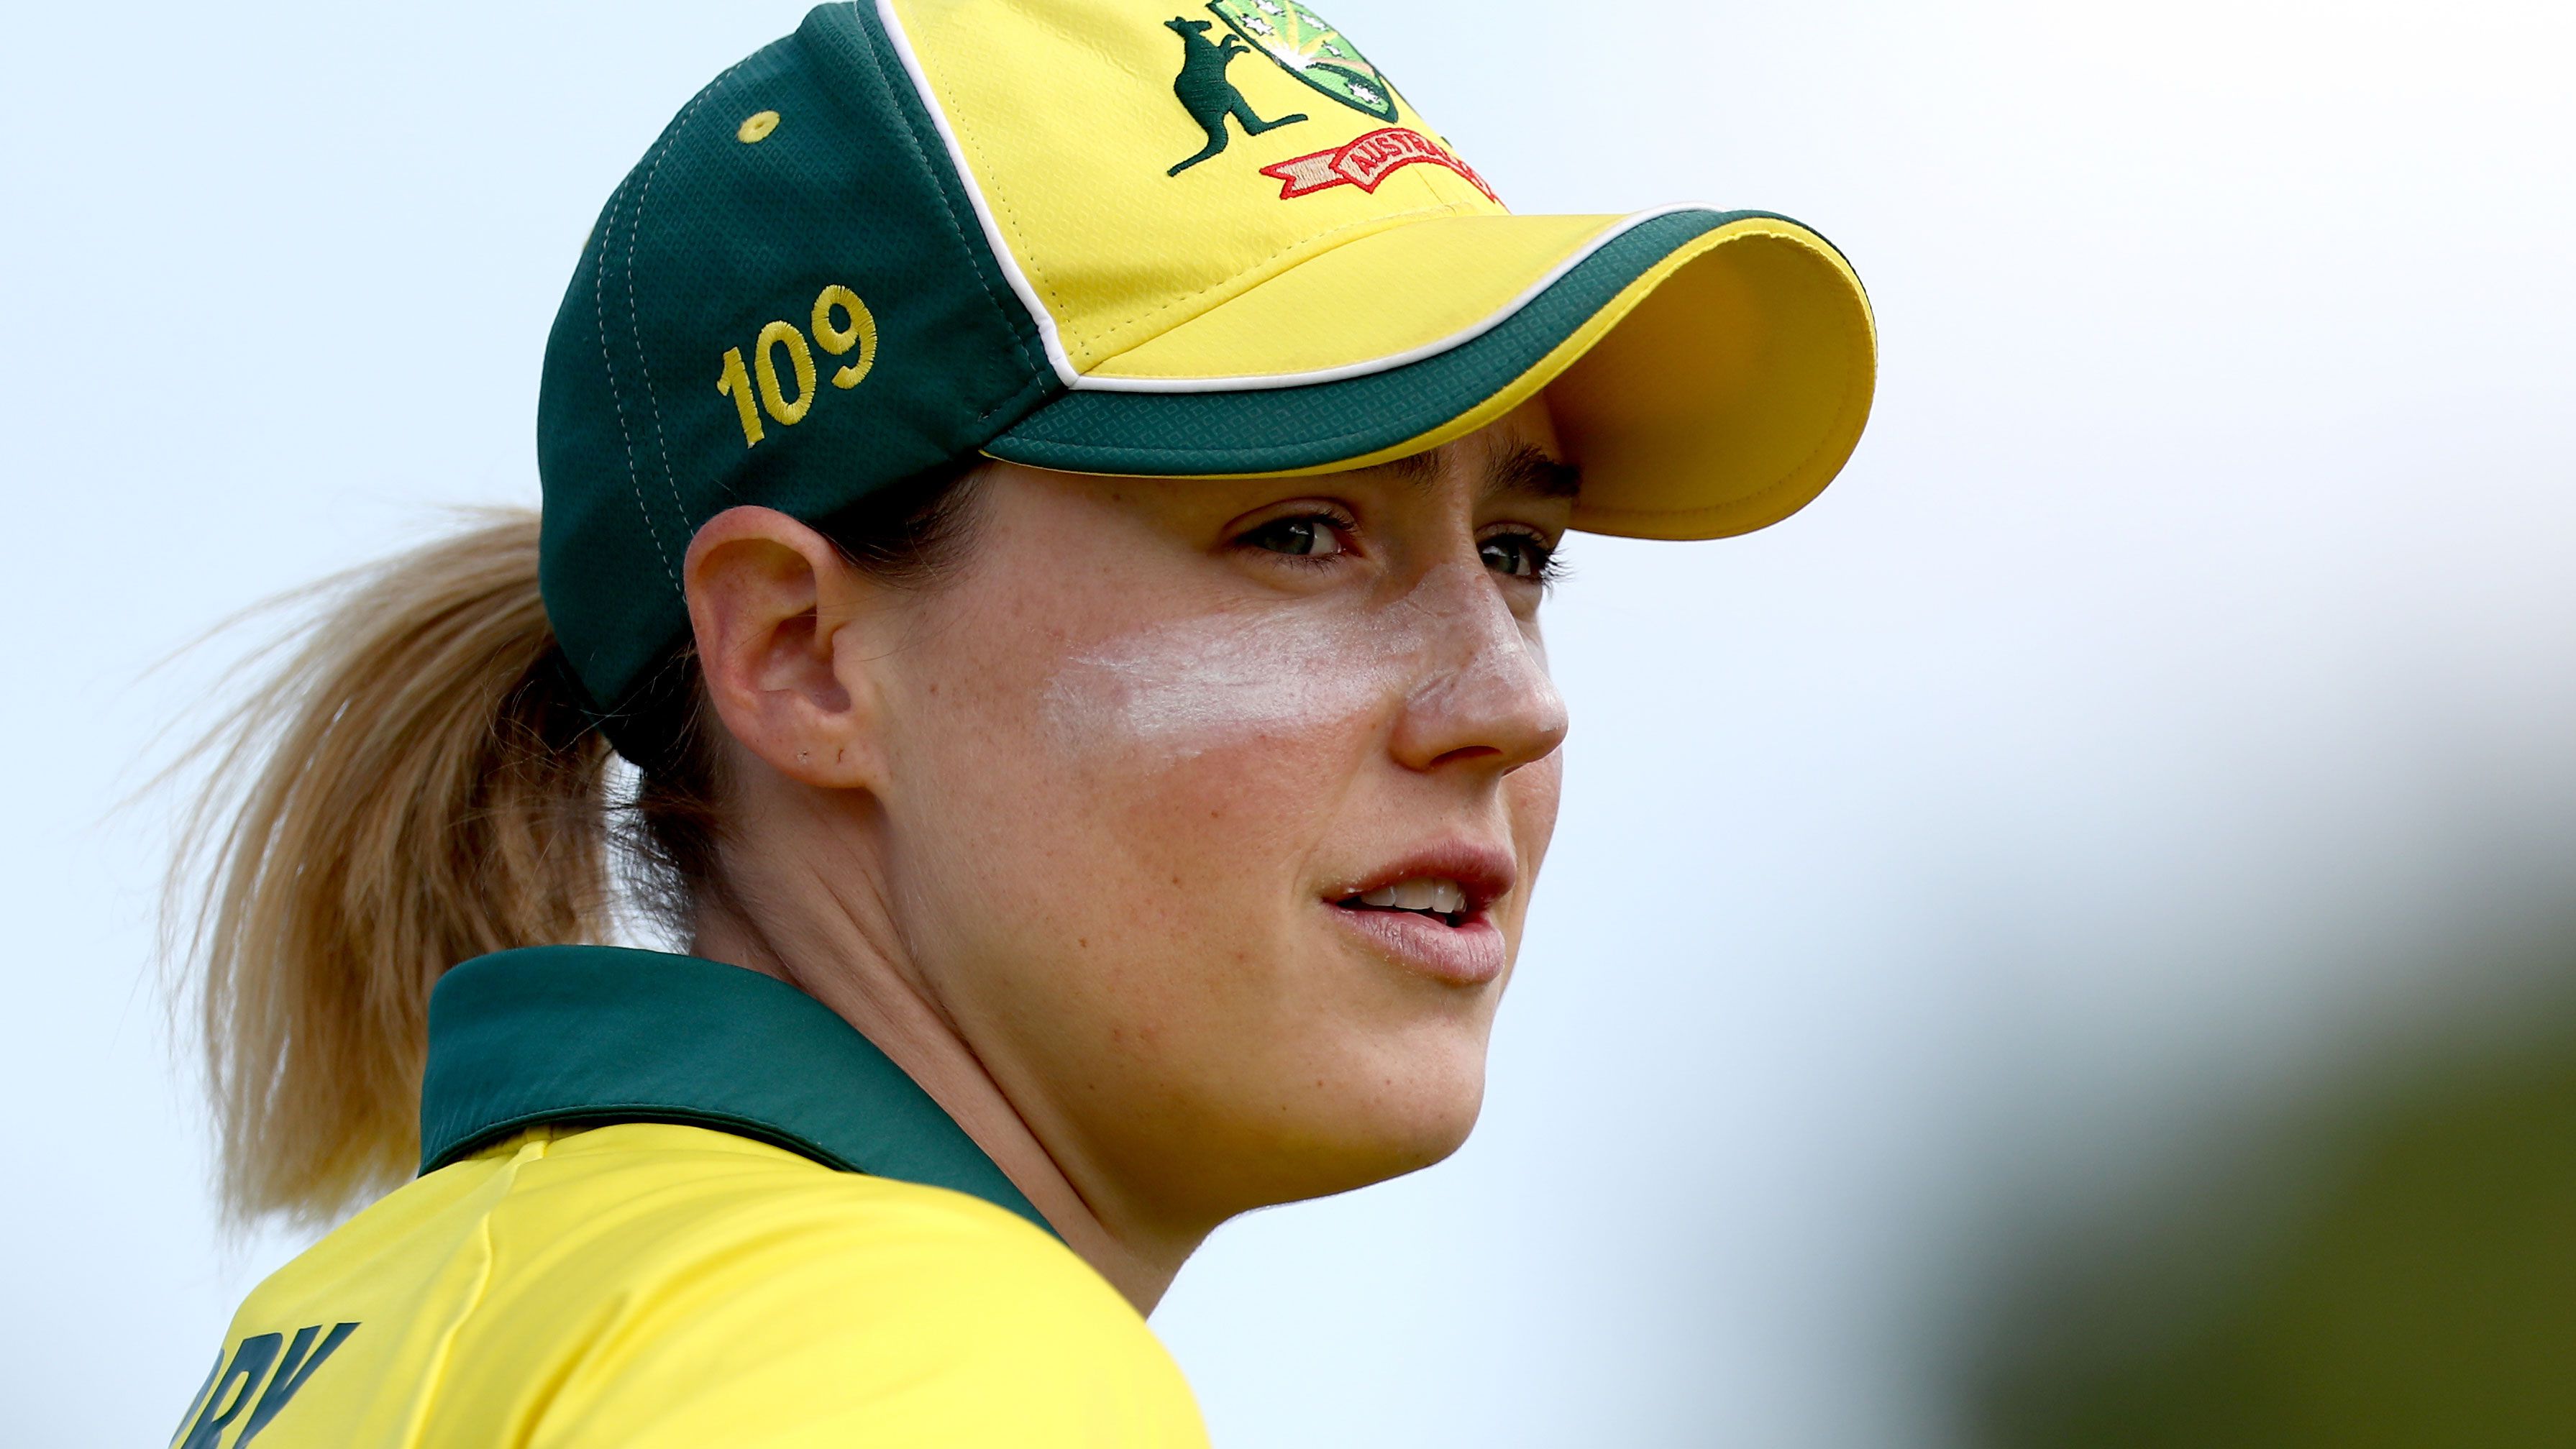 Beth Mooney exclusive column: The next step in the evolution of women's cricket